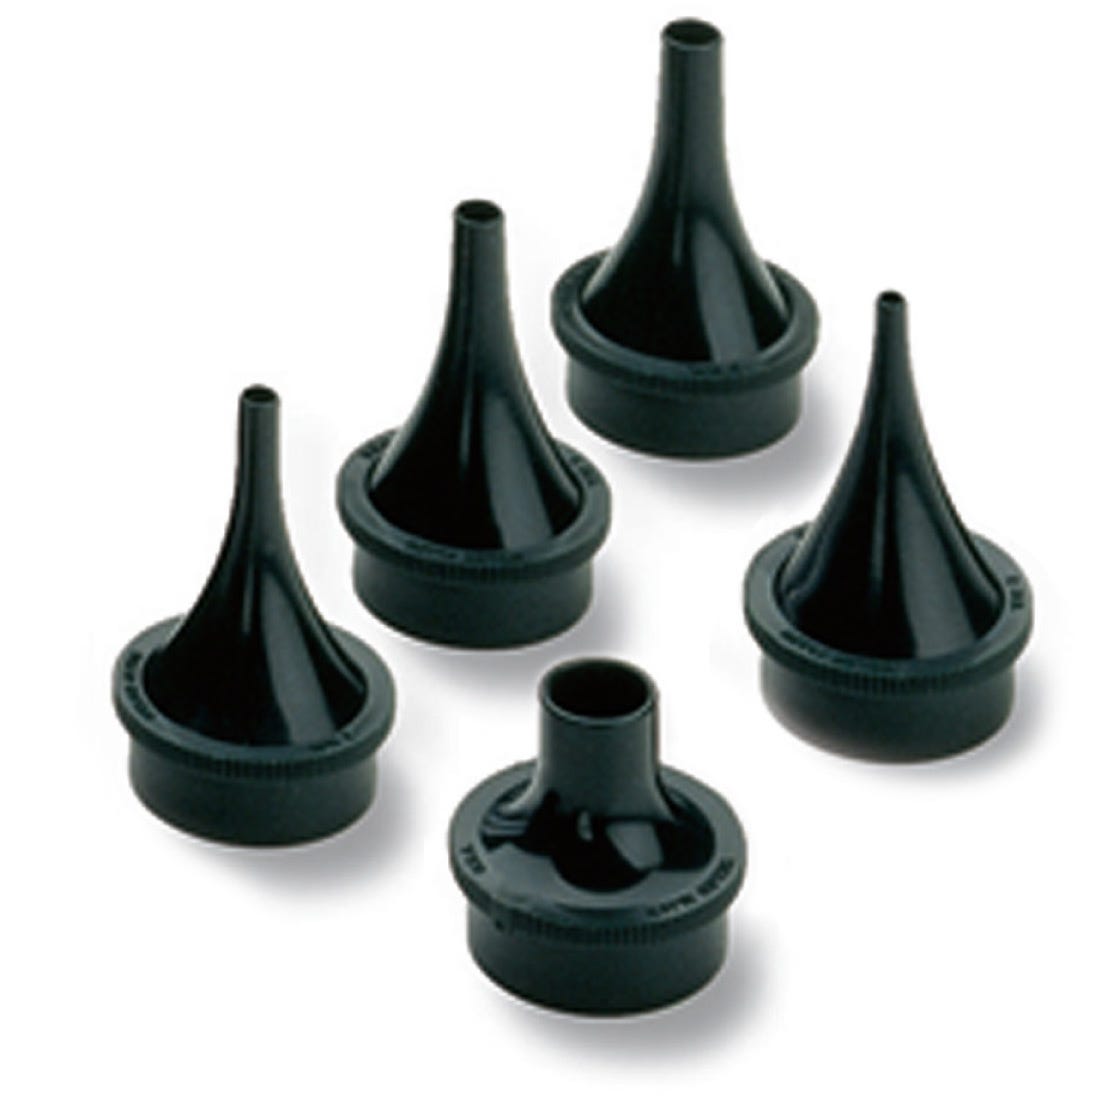 Otoscope Specula for 3.5V and 2.5V Otoscopes - Set of Five Specula (2, 3, 4, 5 and 9mm)